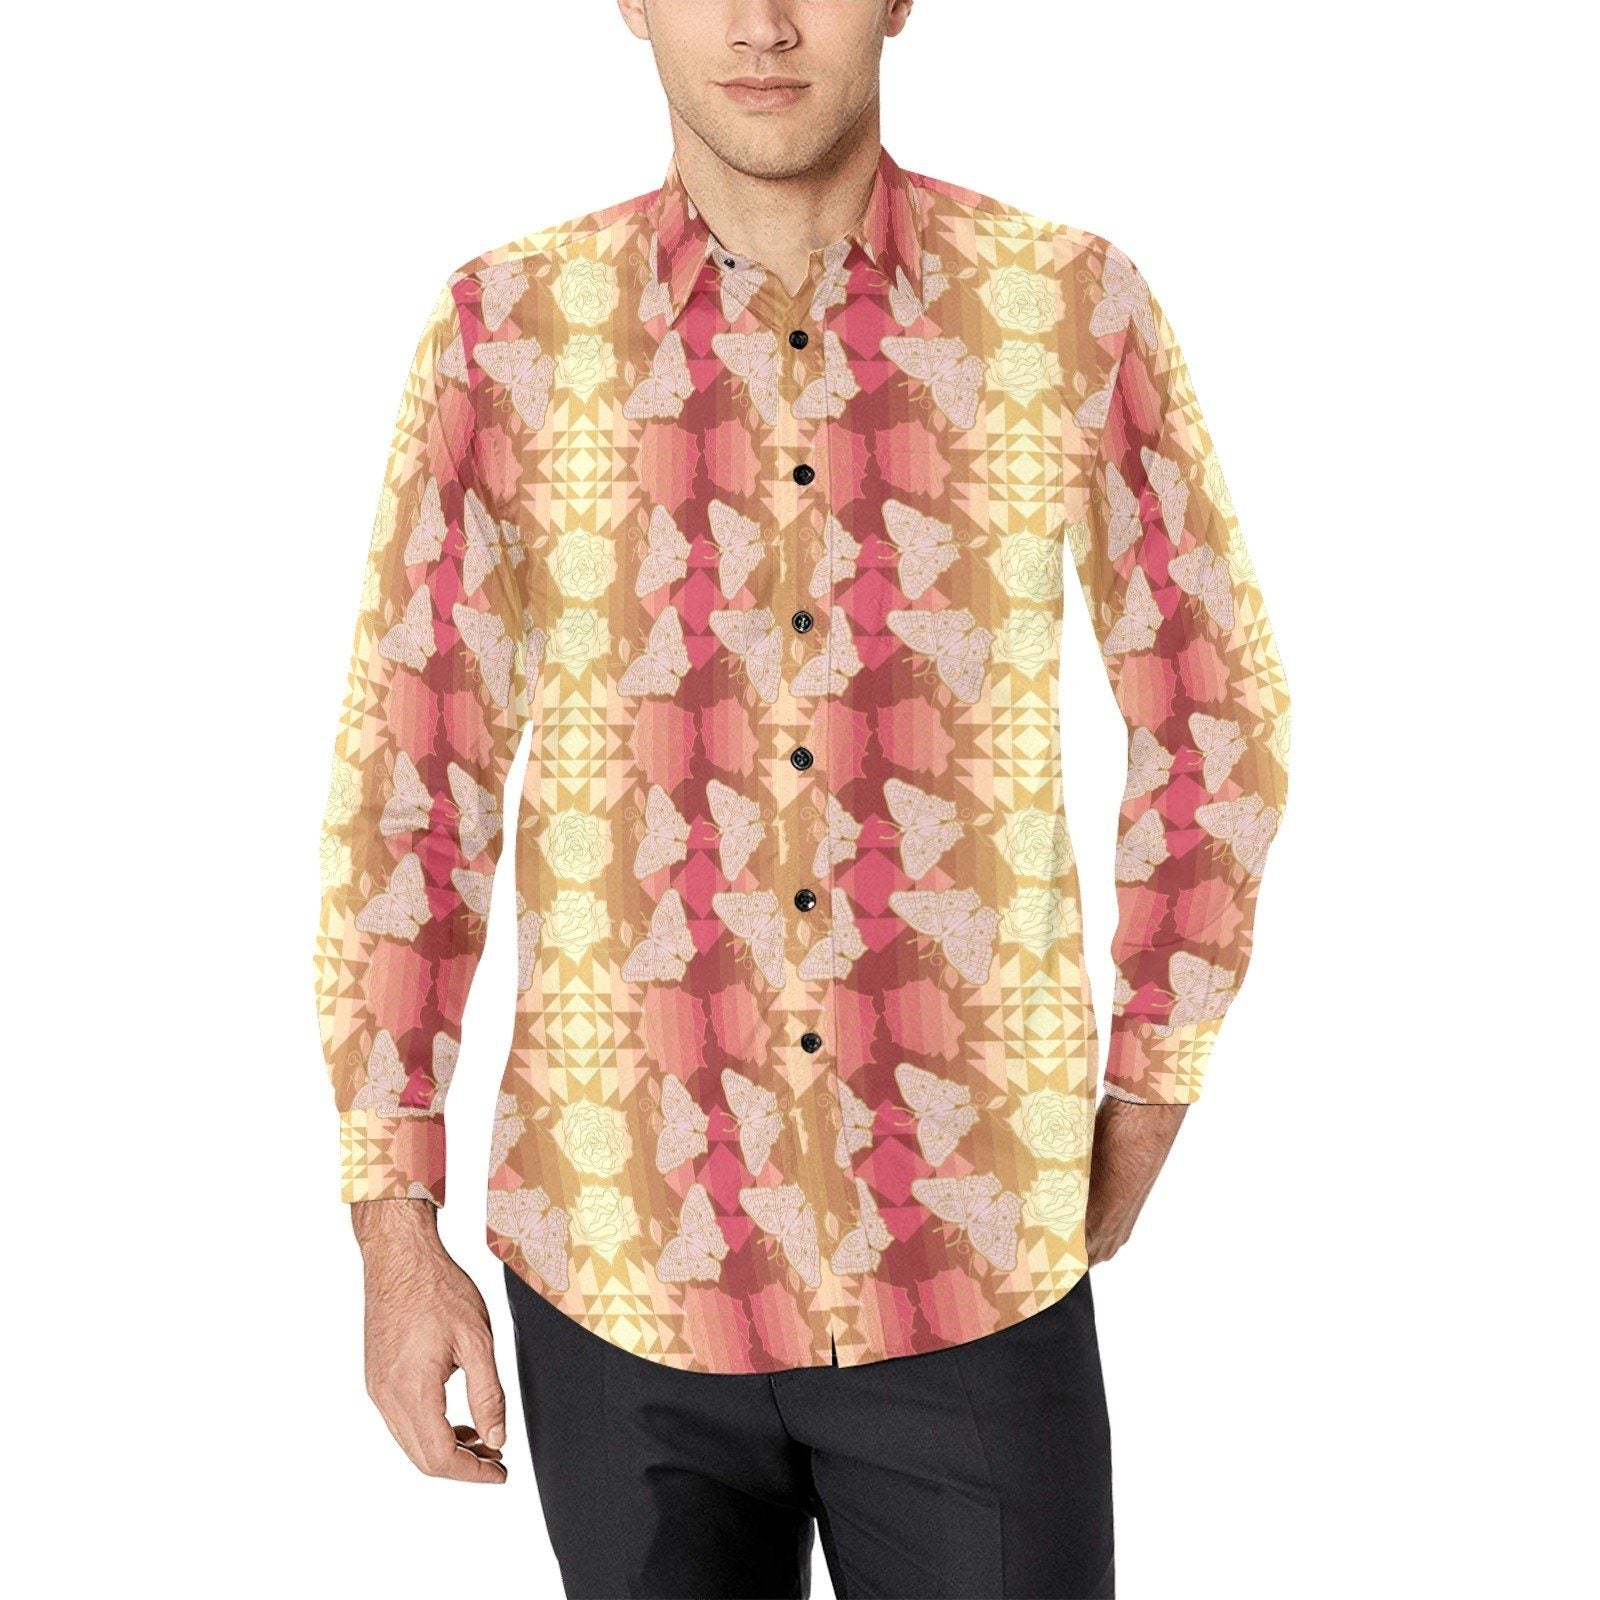 Butterfly and Roses on Geometric Dress Shirt